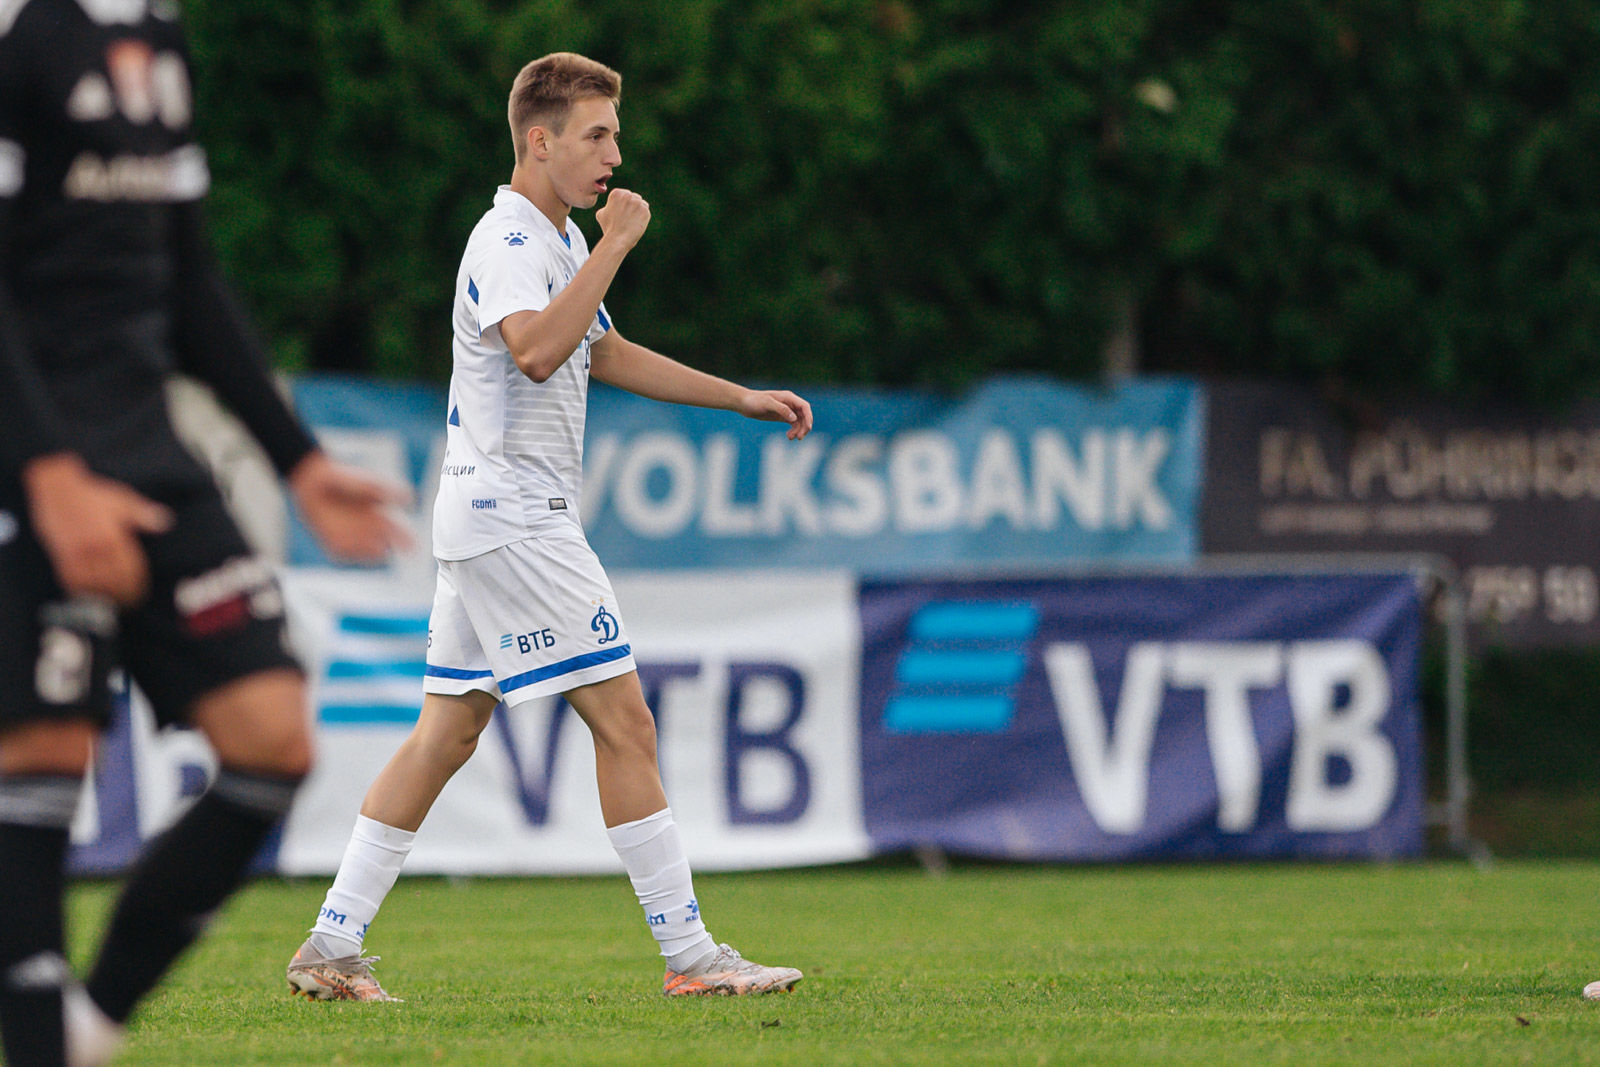 Photo gallery from the friendly match against Dynamo Ceske Budejovice